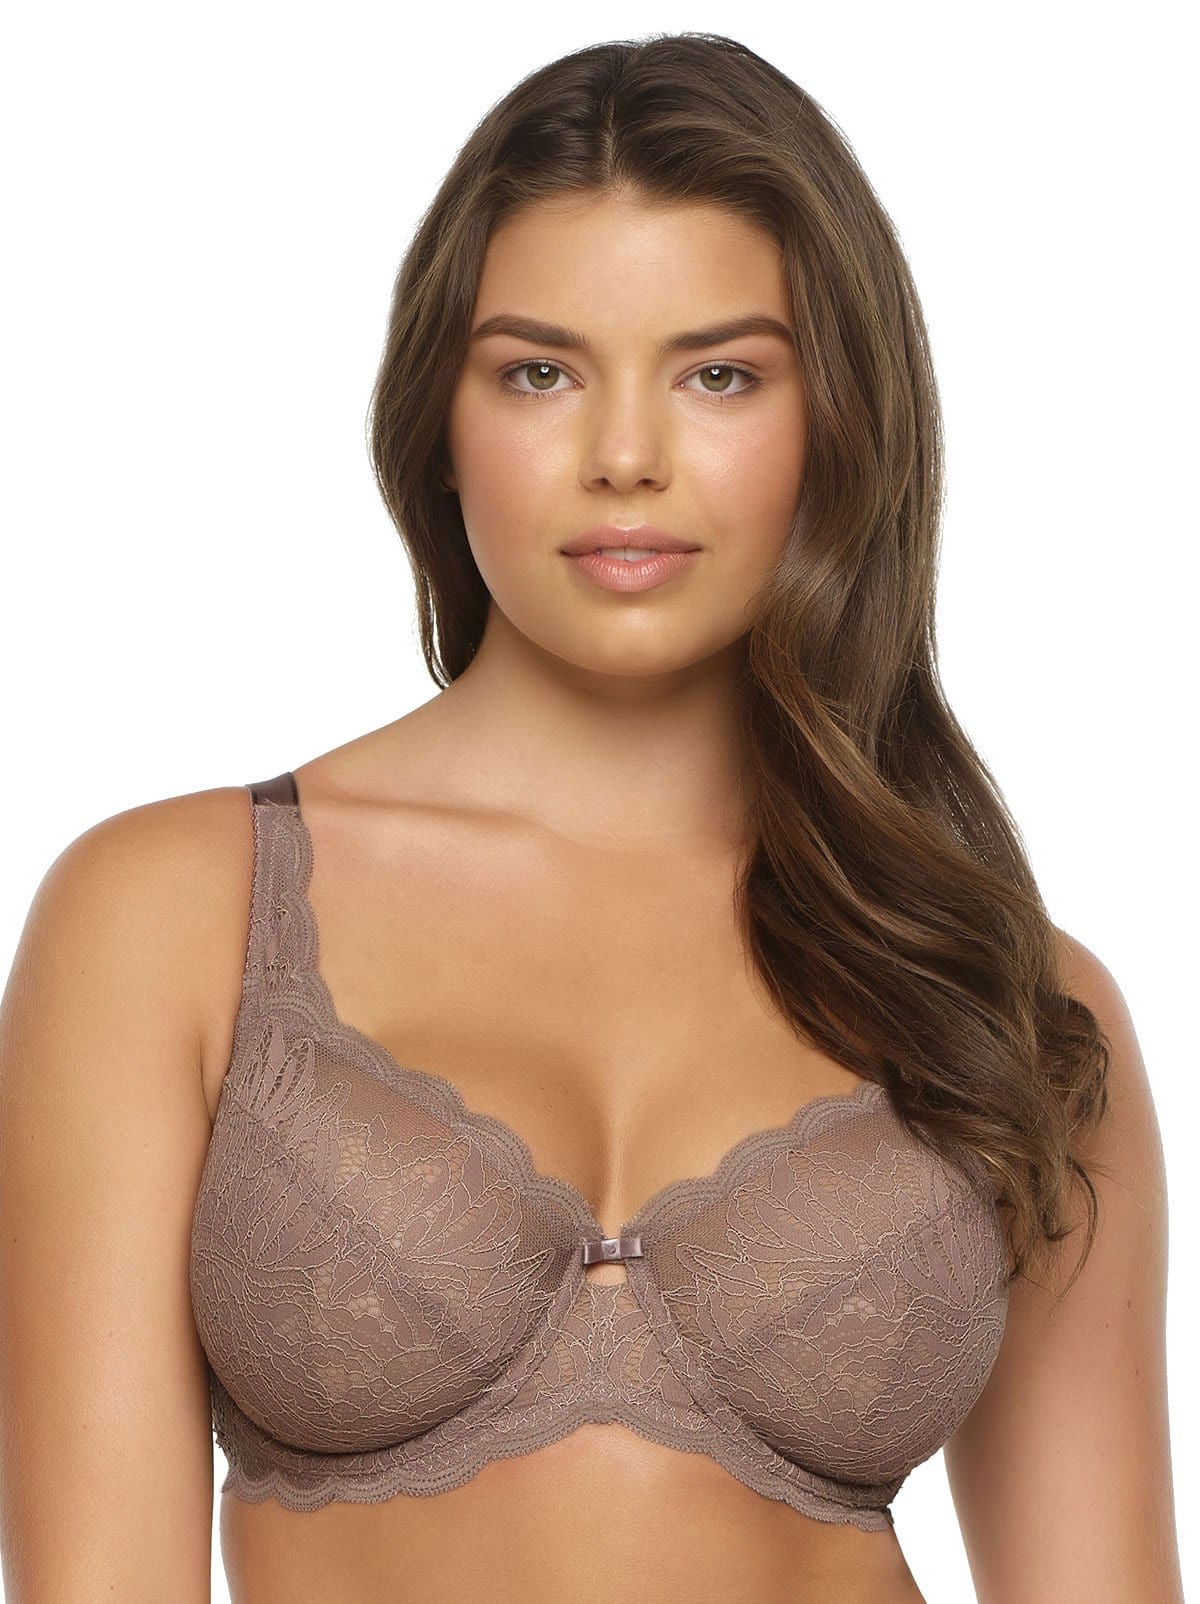 Paramour by Felina Sweet Revenge Unline Bra to DDD Cup